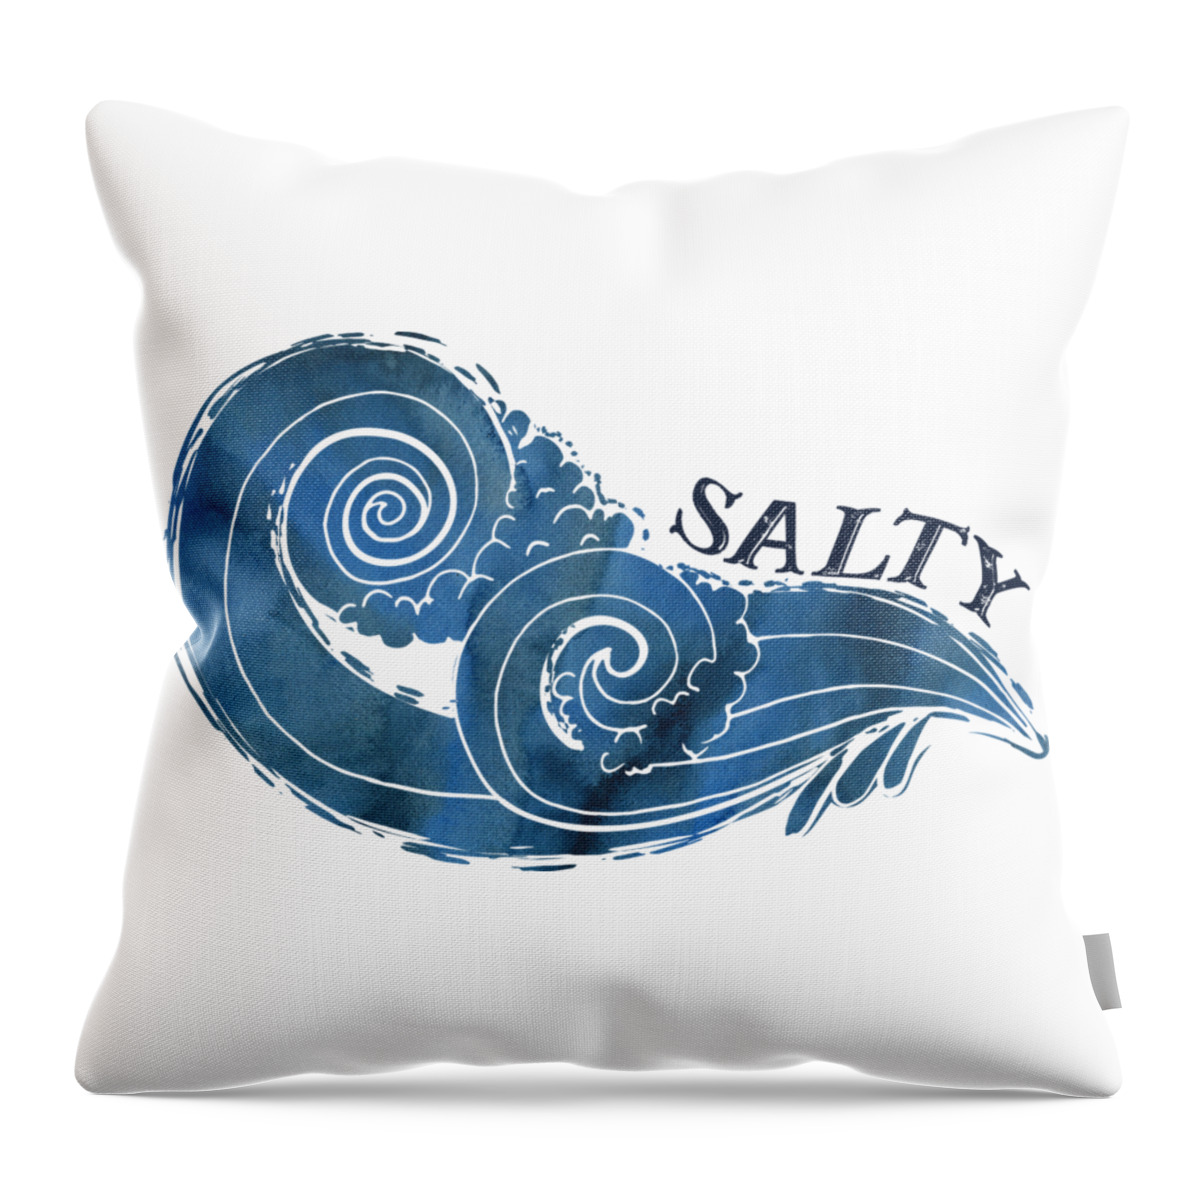 Salty Throw Pillow featuring the photograph Salty by Heather Applegate